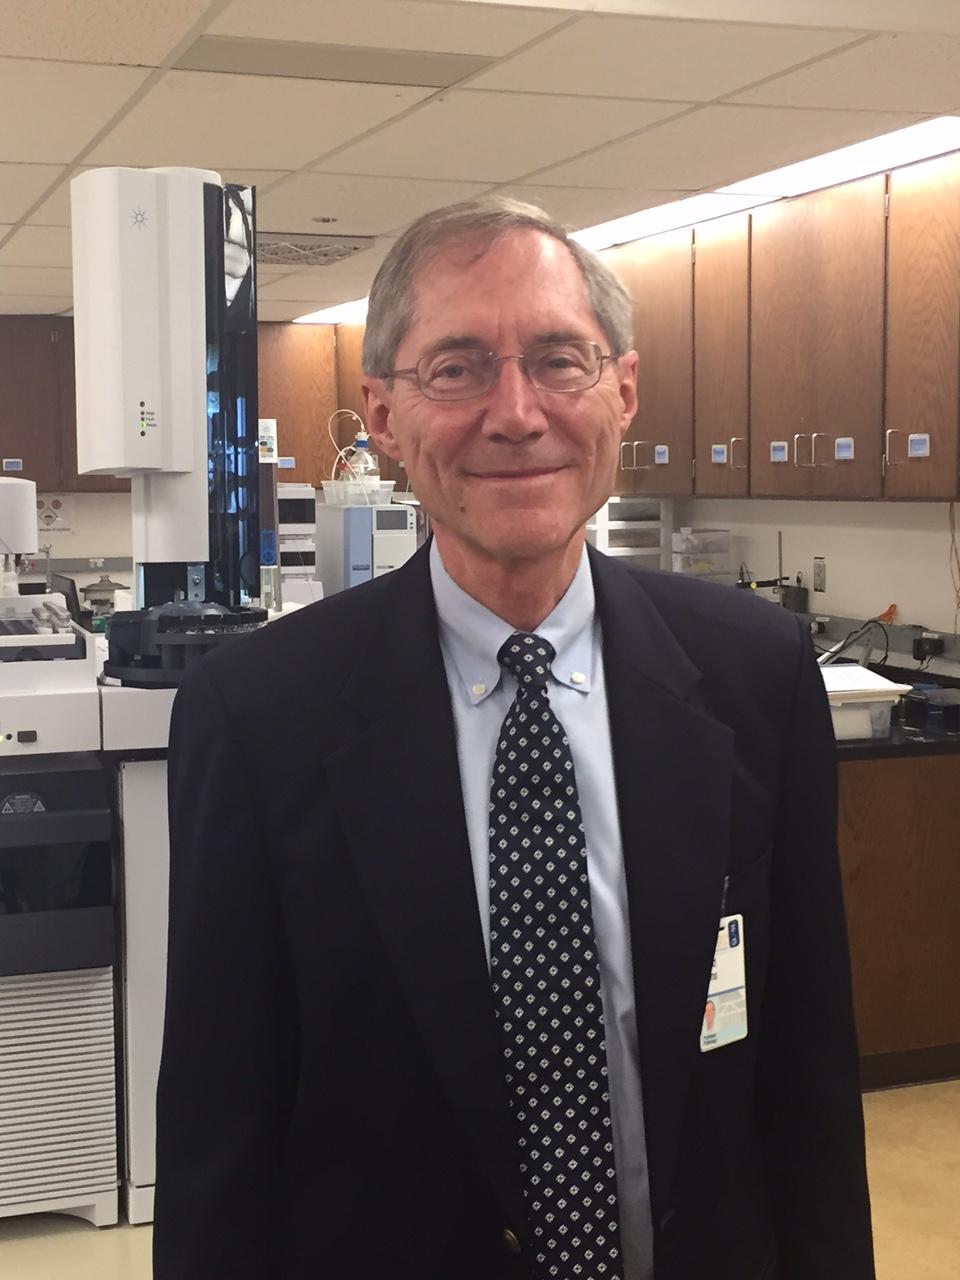 UVA pathologist David Bruns was one of the founders of the guidelines and now has helped revise them to make them more effective and useful.